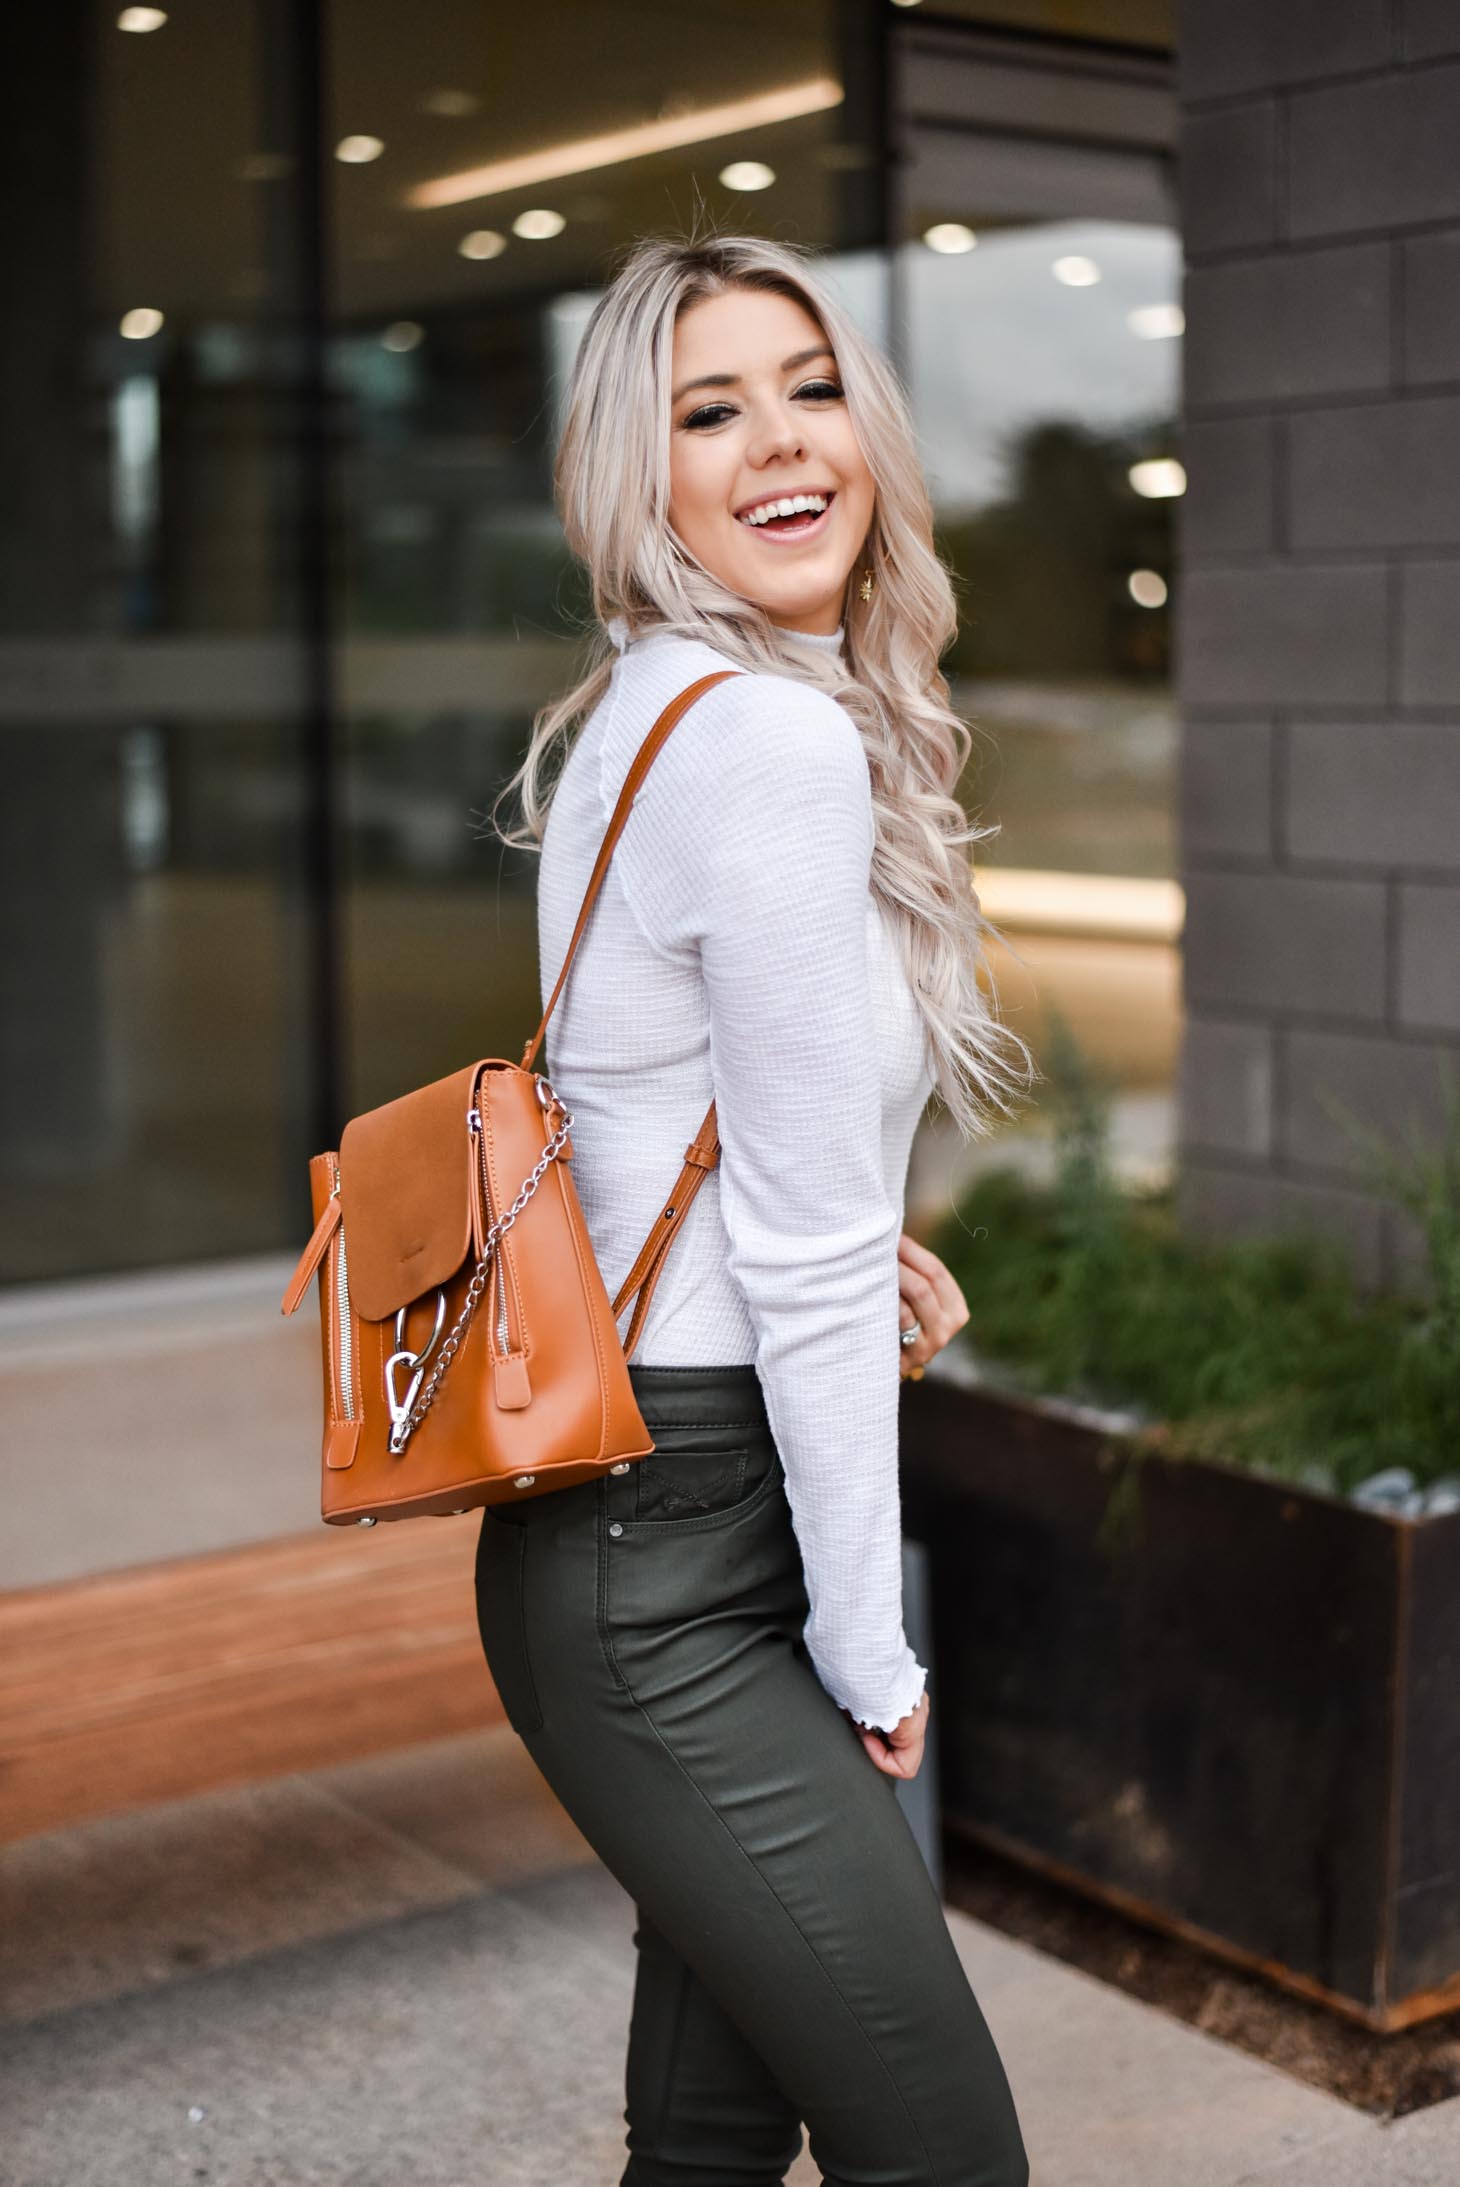 Erin Elizabeth of Wink and a Twirl shares the perfect leather pants and turtleneck look from Lulus during her stay at the AC Hotel Phoenix Biltmore in Phoenix, Arizona